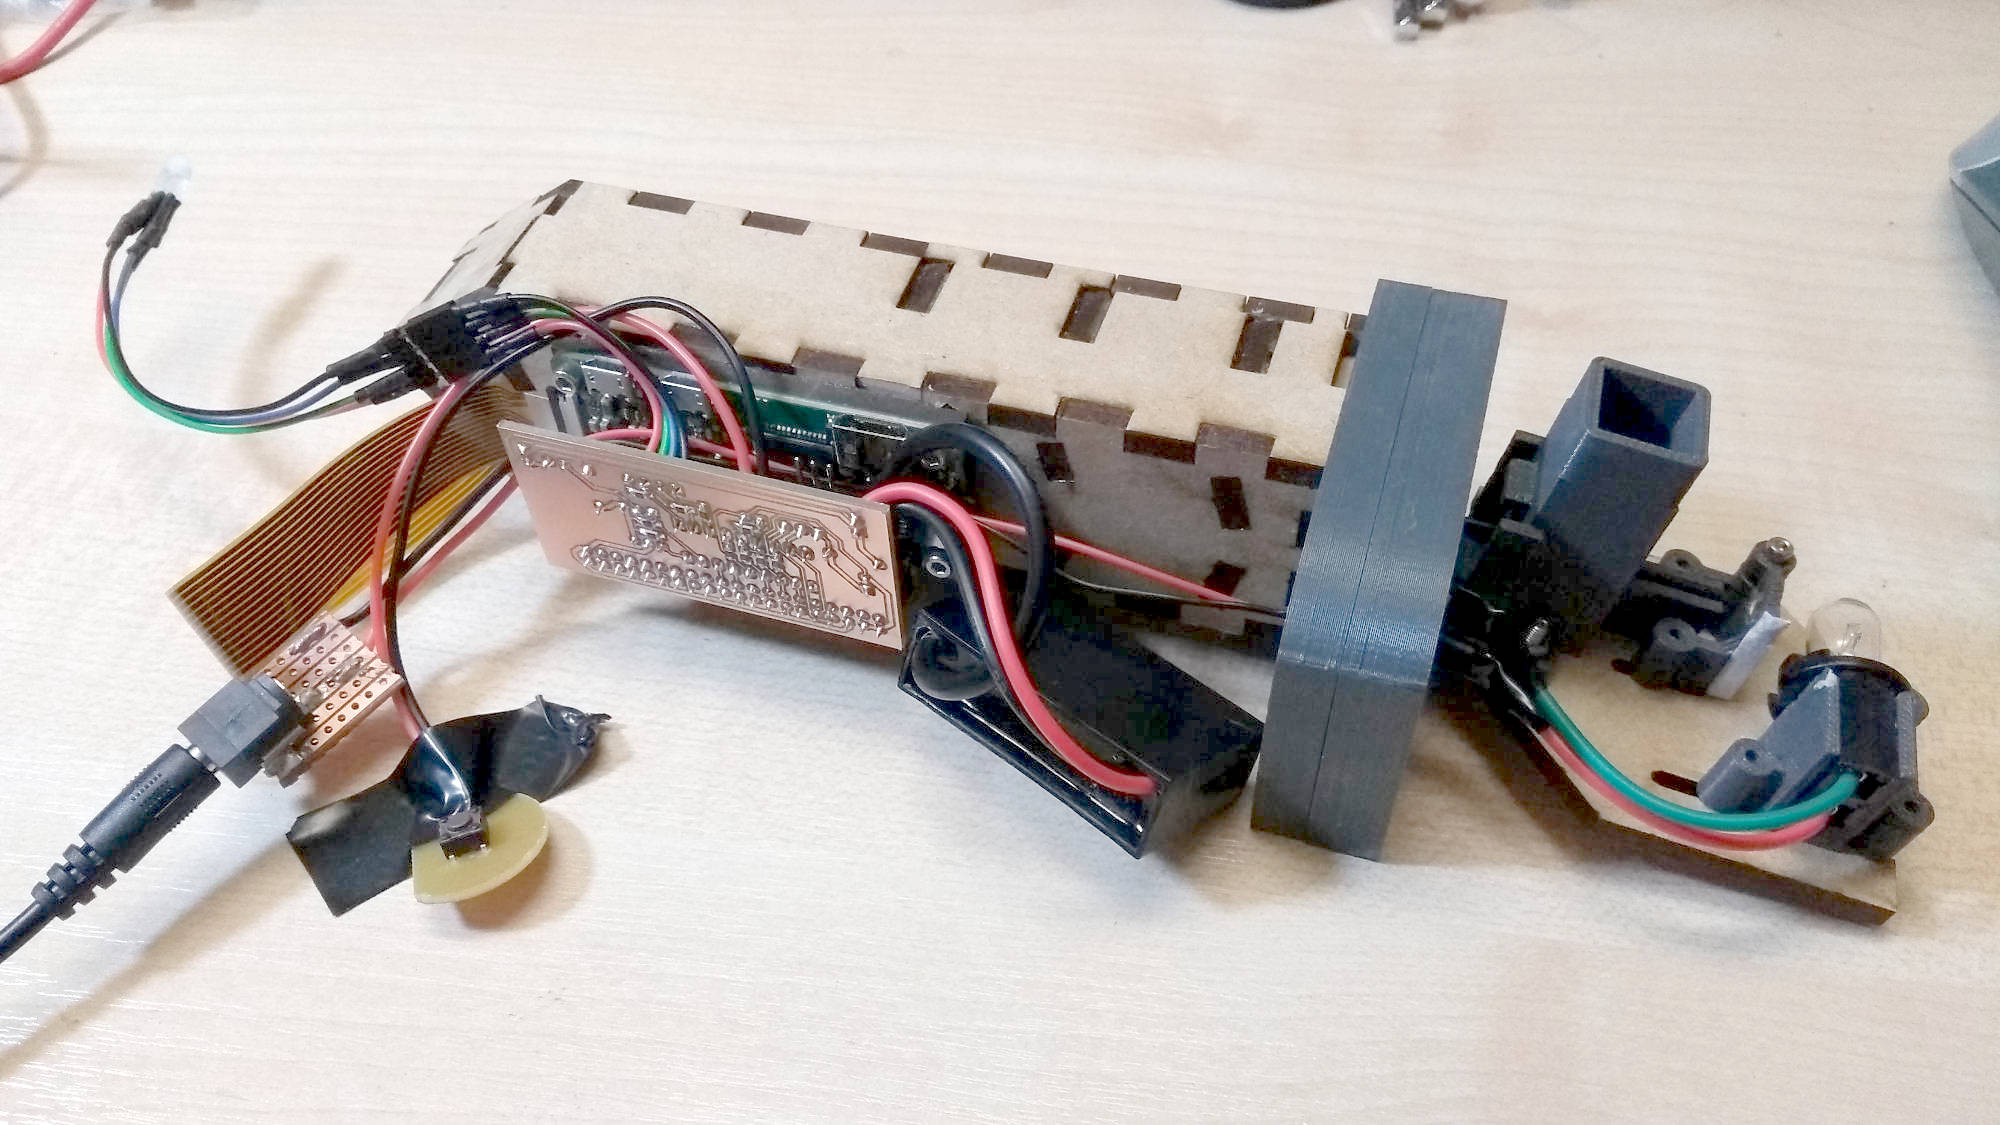 The internals of the spectrometer - an MDF box with a Raspberry Pi mounted to it, various wires going everywhere and a small bulb on the far left.